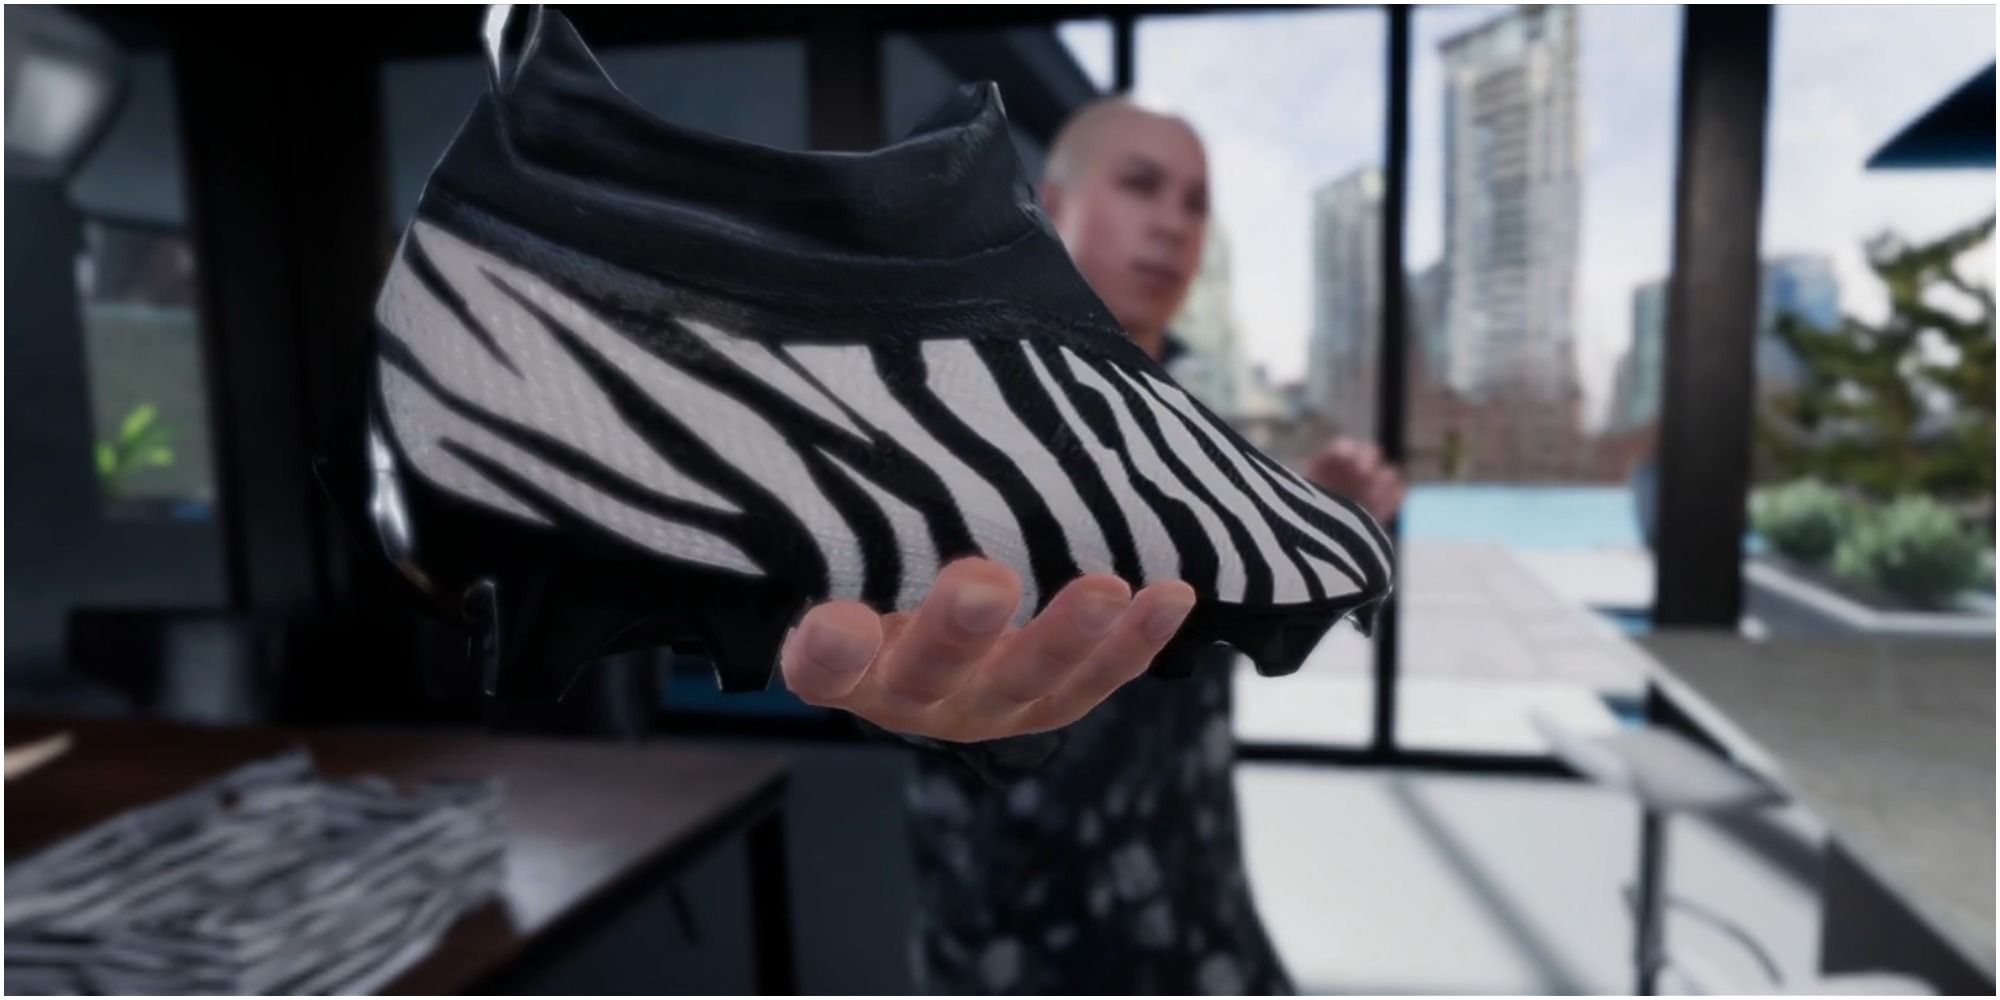 Madden NFL 22 Holding Up The Zebra Shoe To The Camera